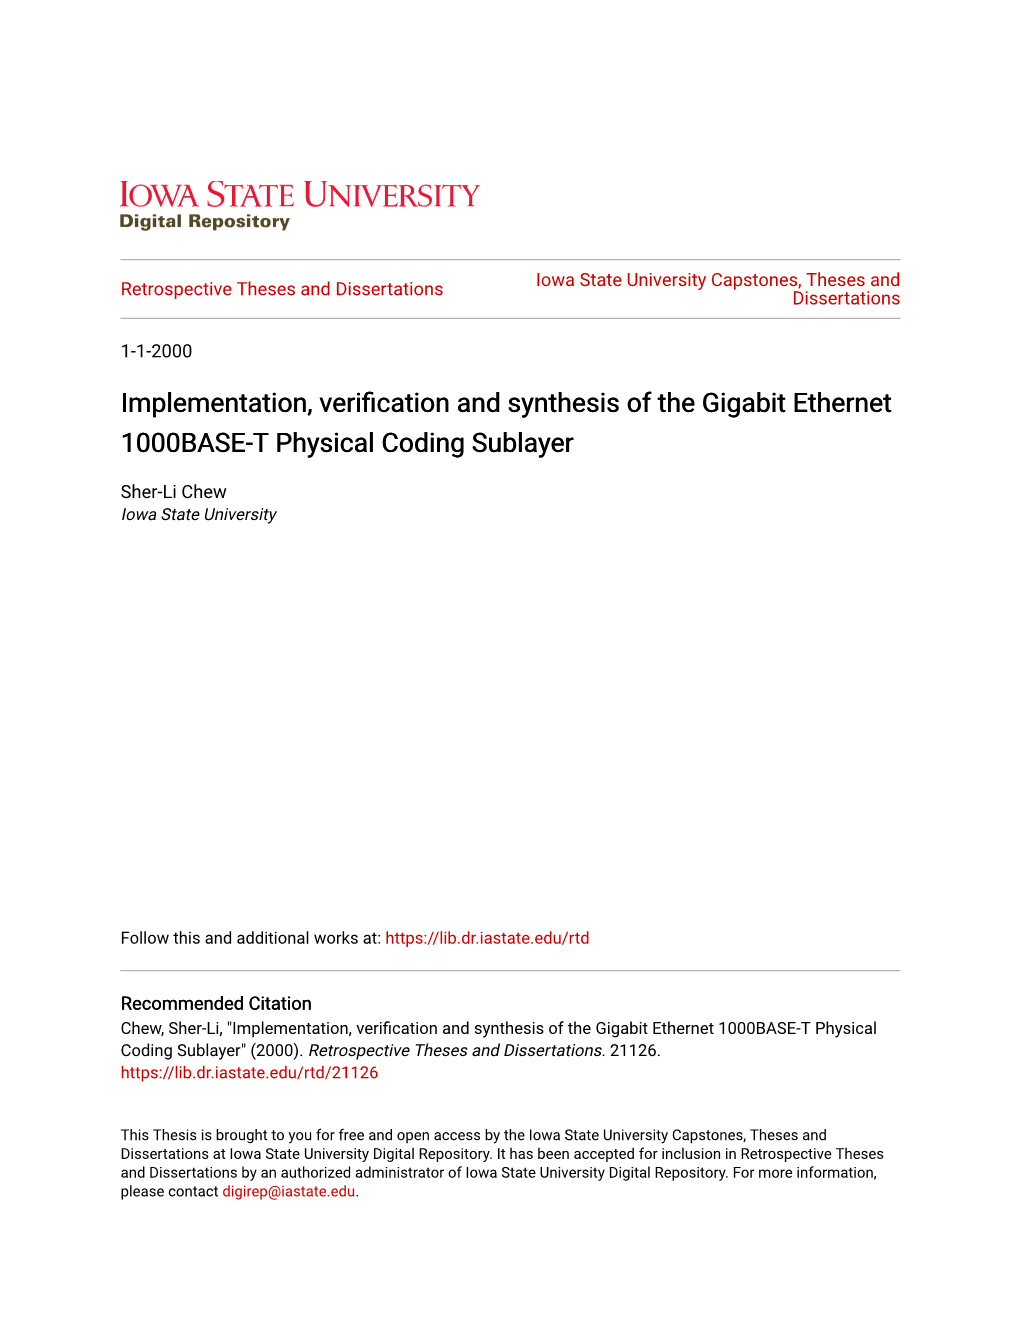 Implementation, Verification and Synthesis of the Gigabit Ethernet 1000BASE-T Physical Coding Sublayer